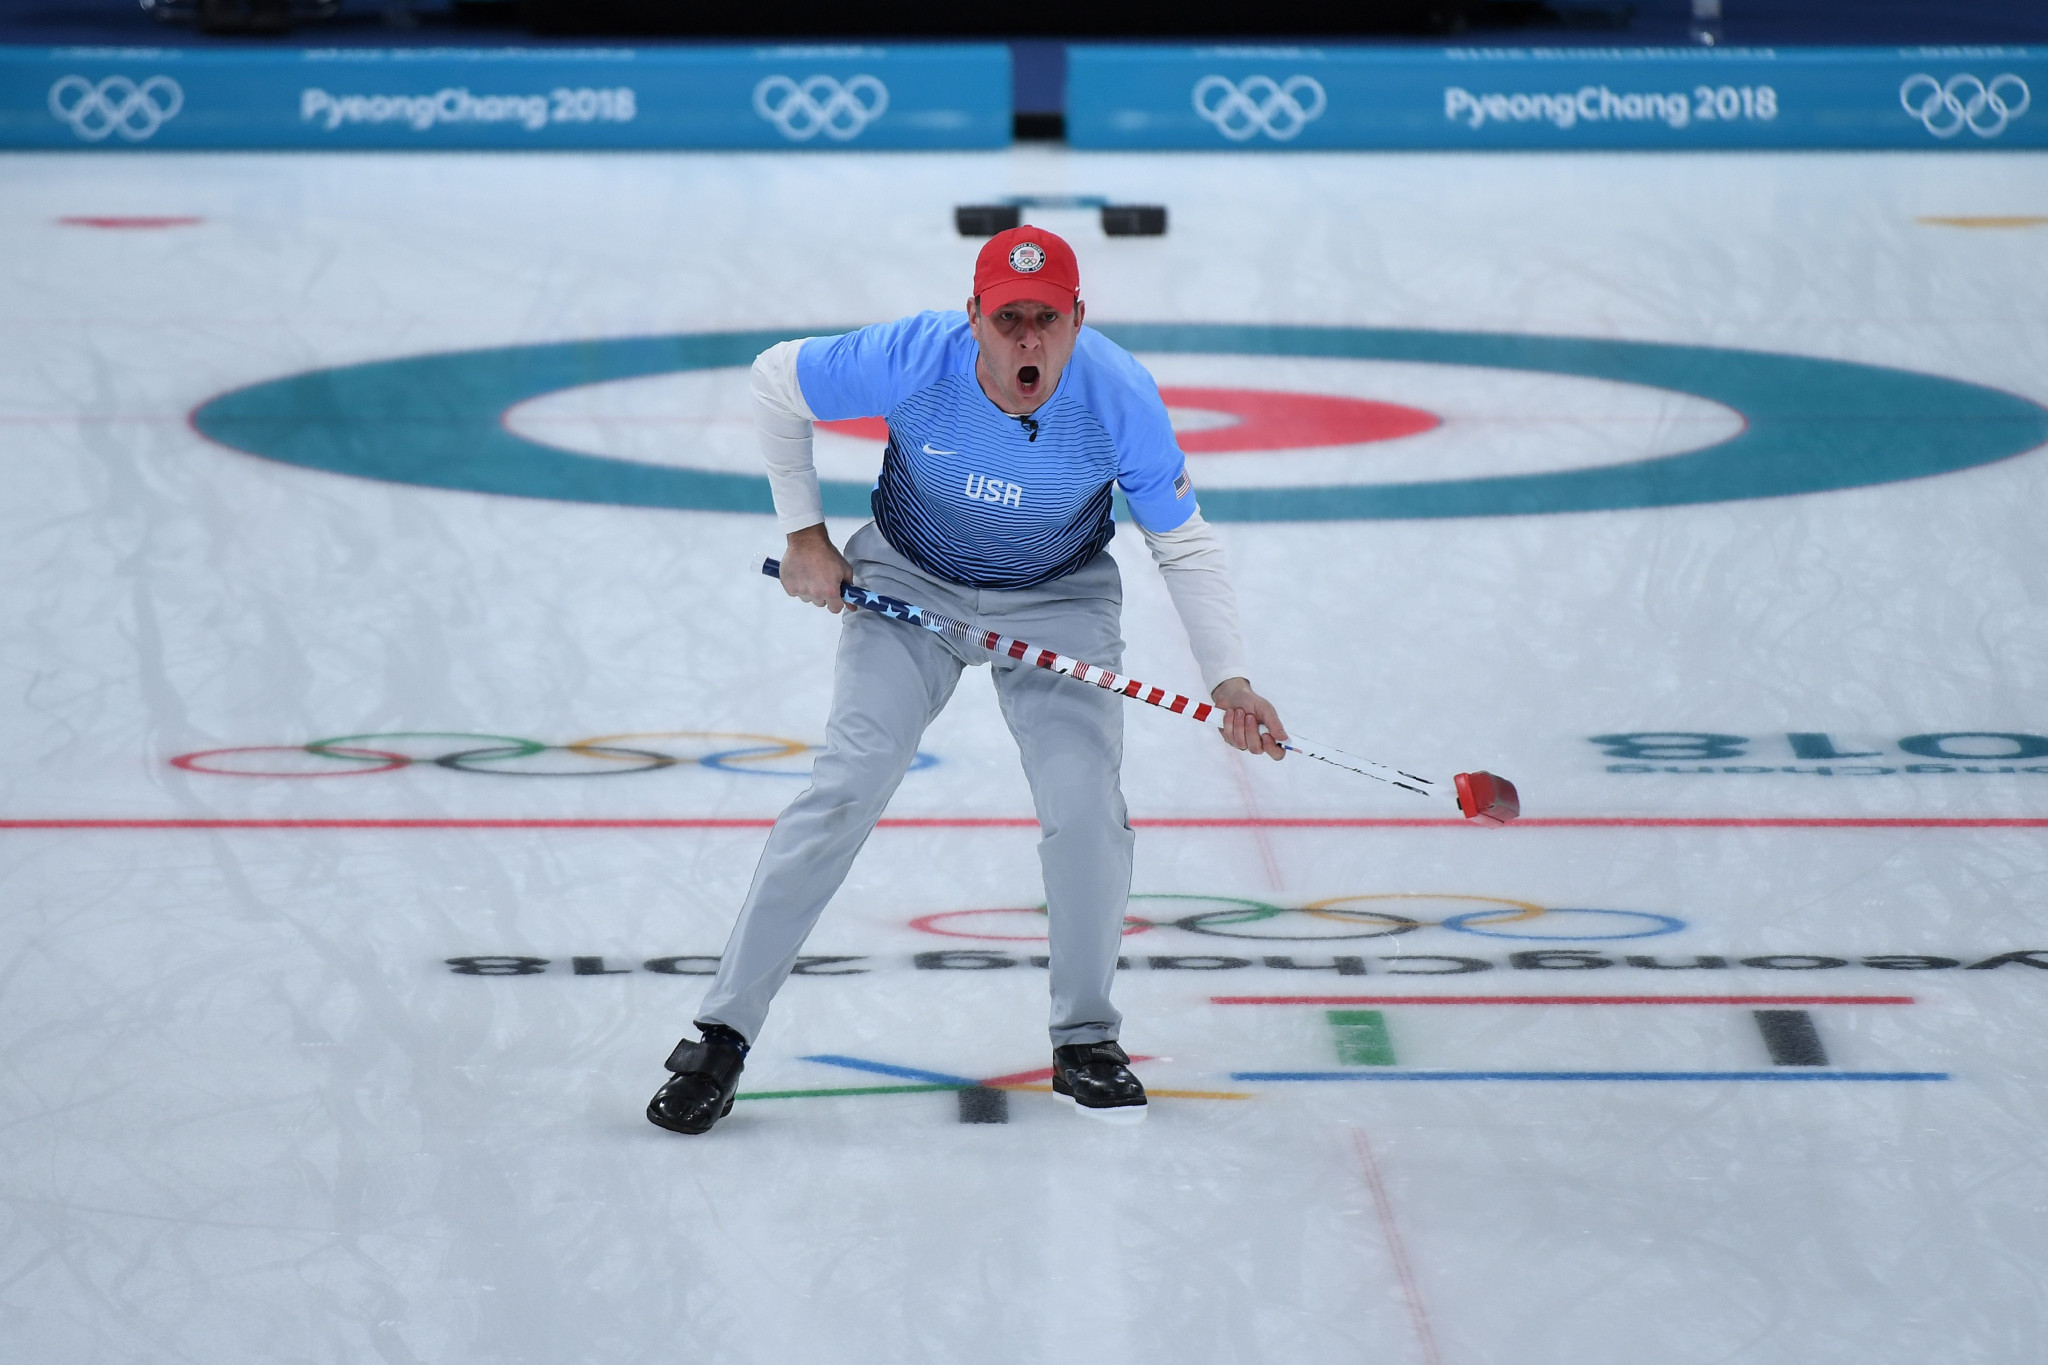 Olympic champion John Shuster will make his first appearance at the World Mixed Doubles Curling Championship in Stavanger ©Getty Images